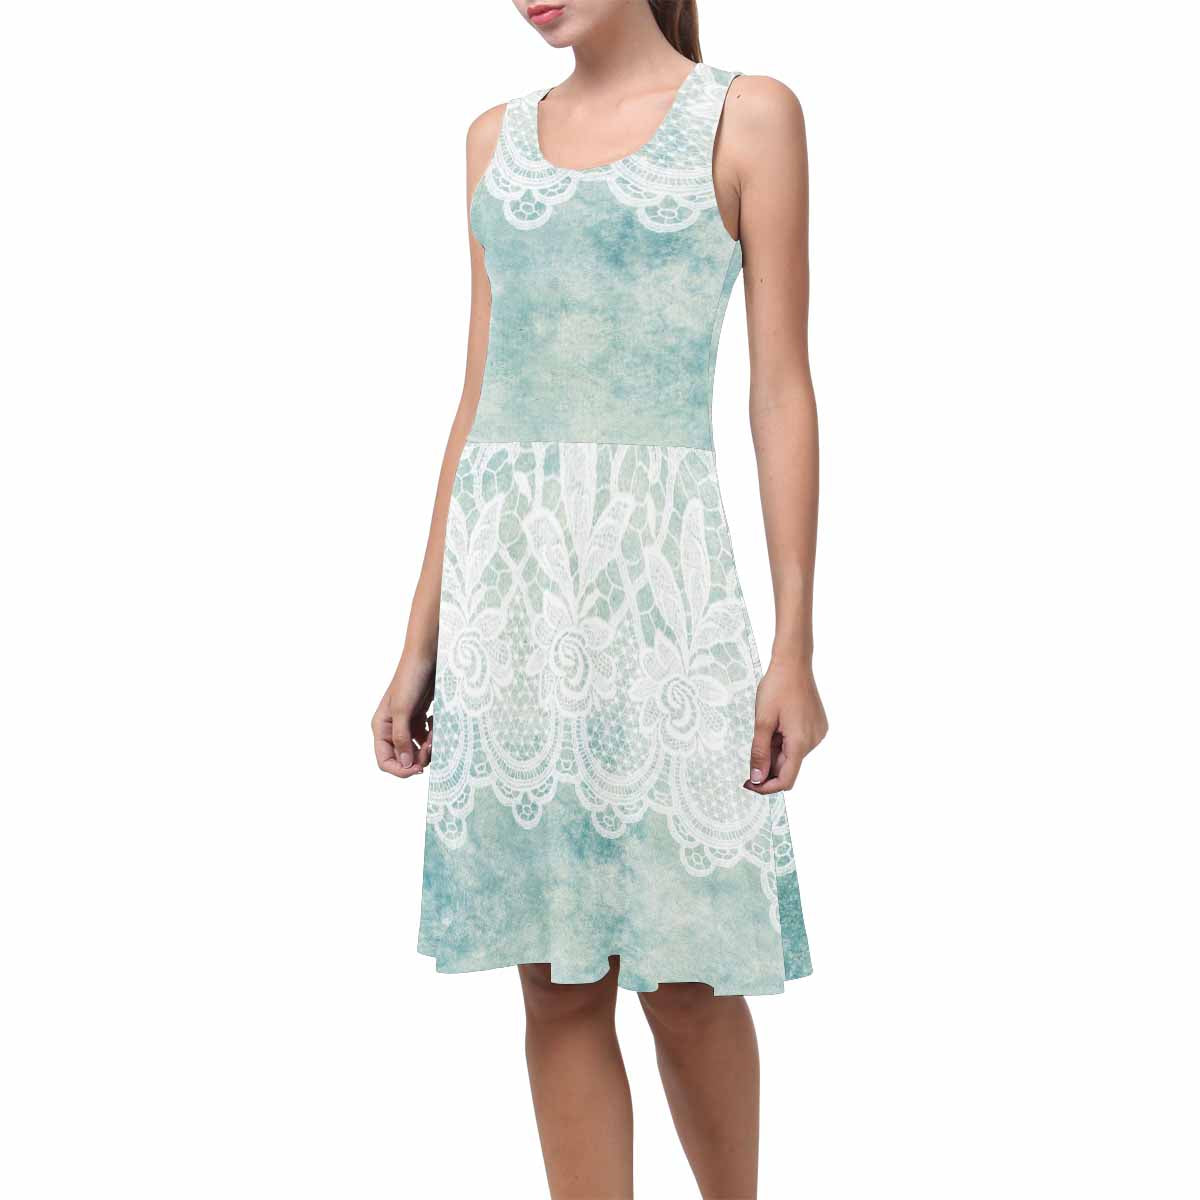 Victorian printed lace summer dress, Design 41